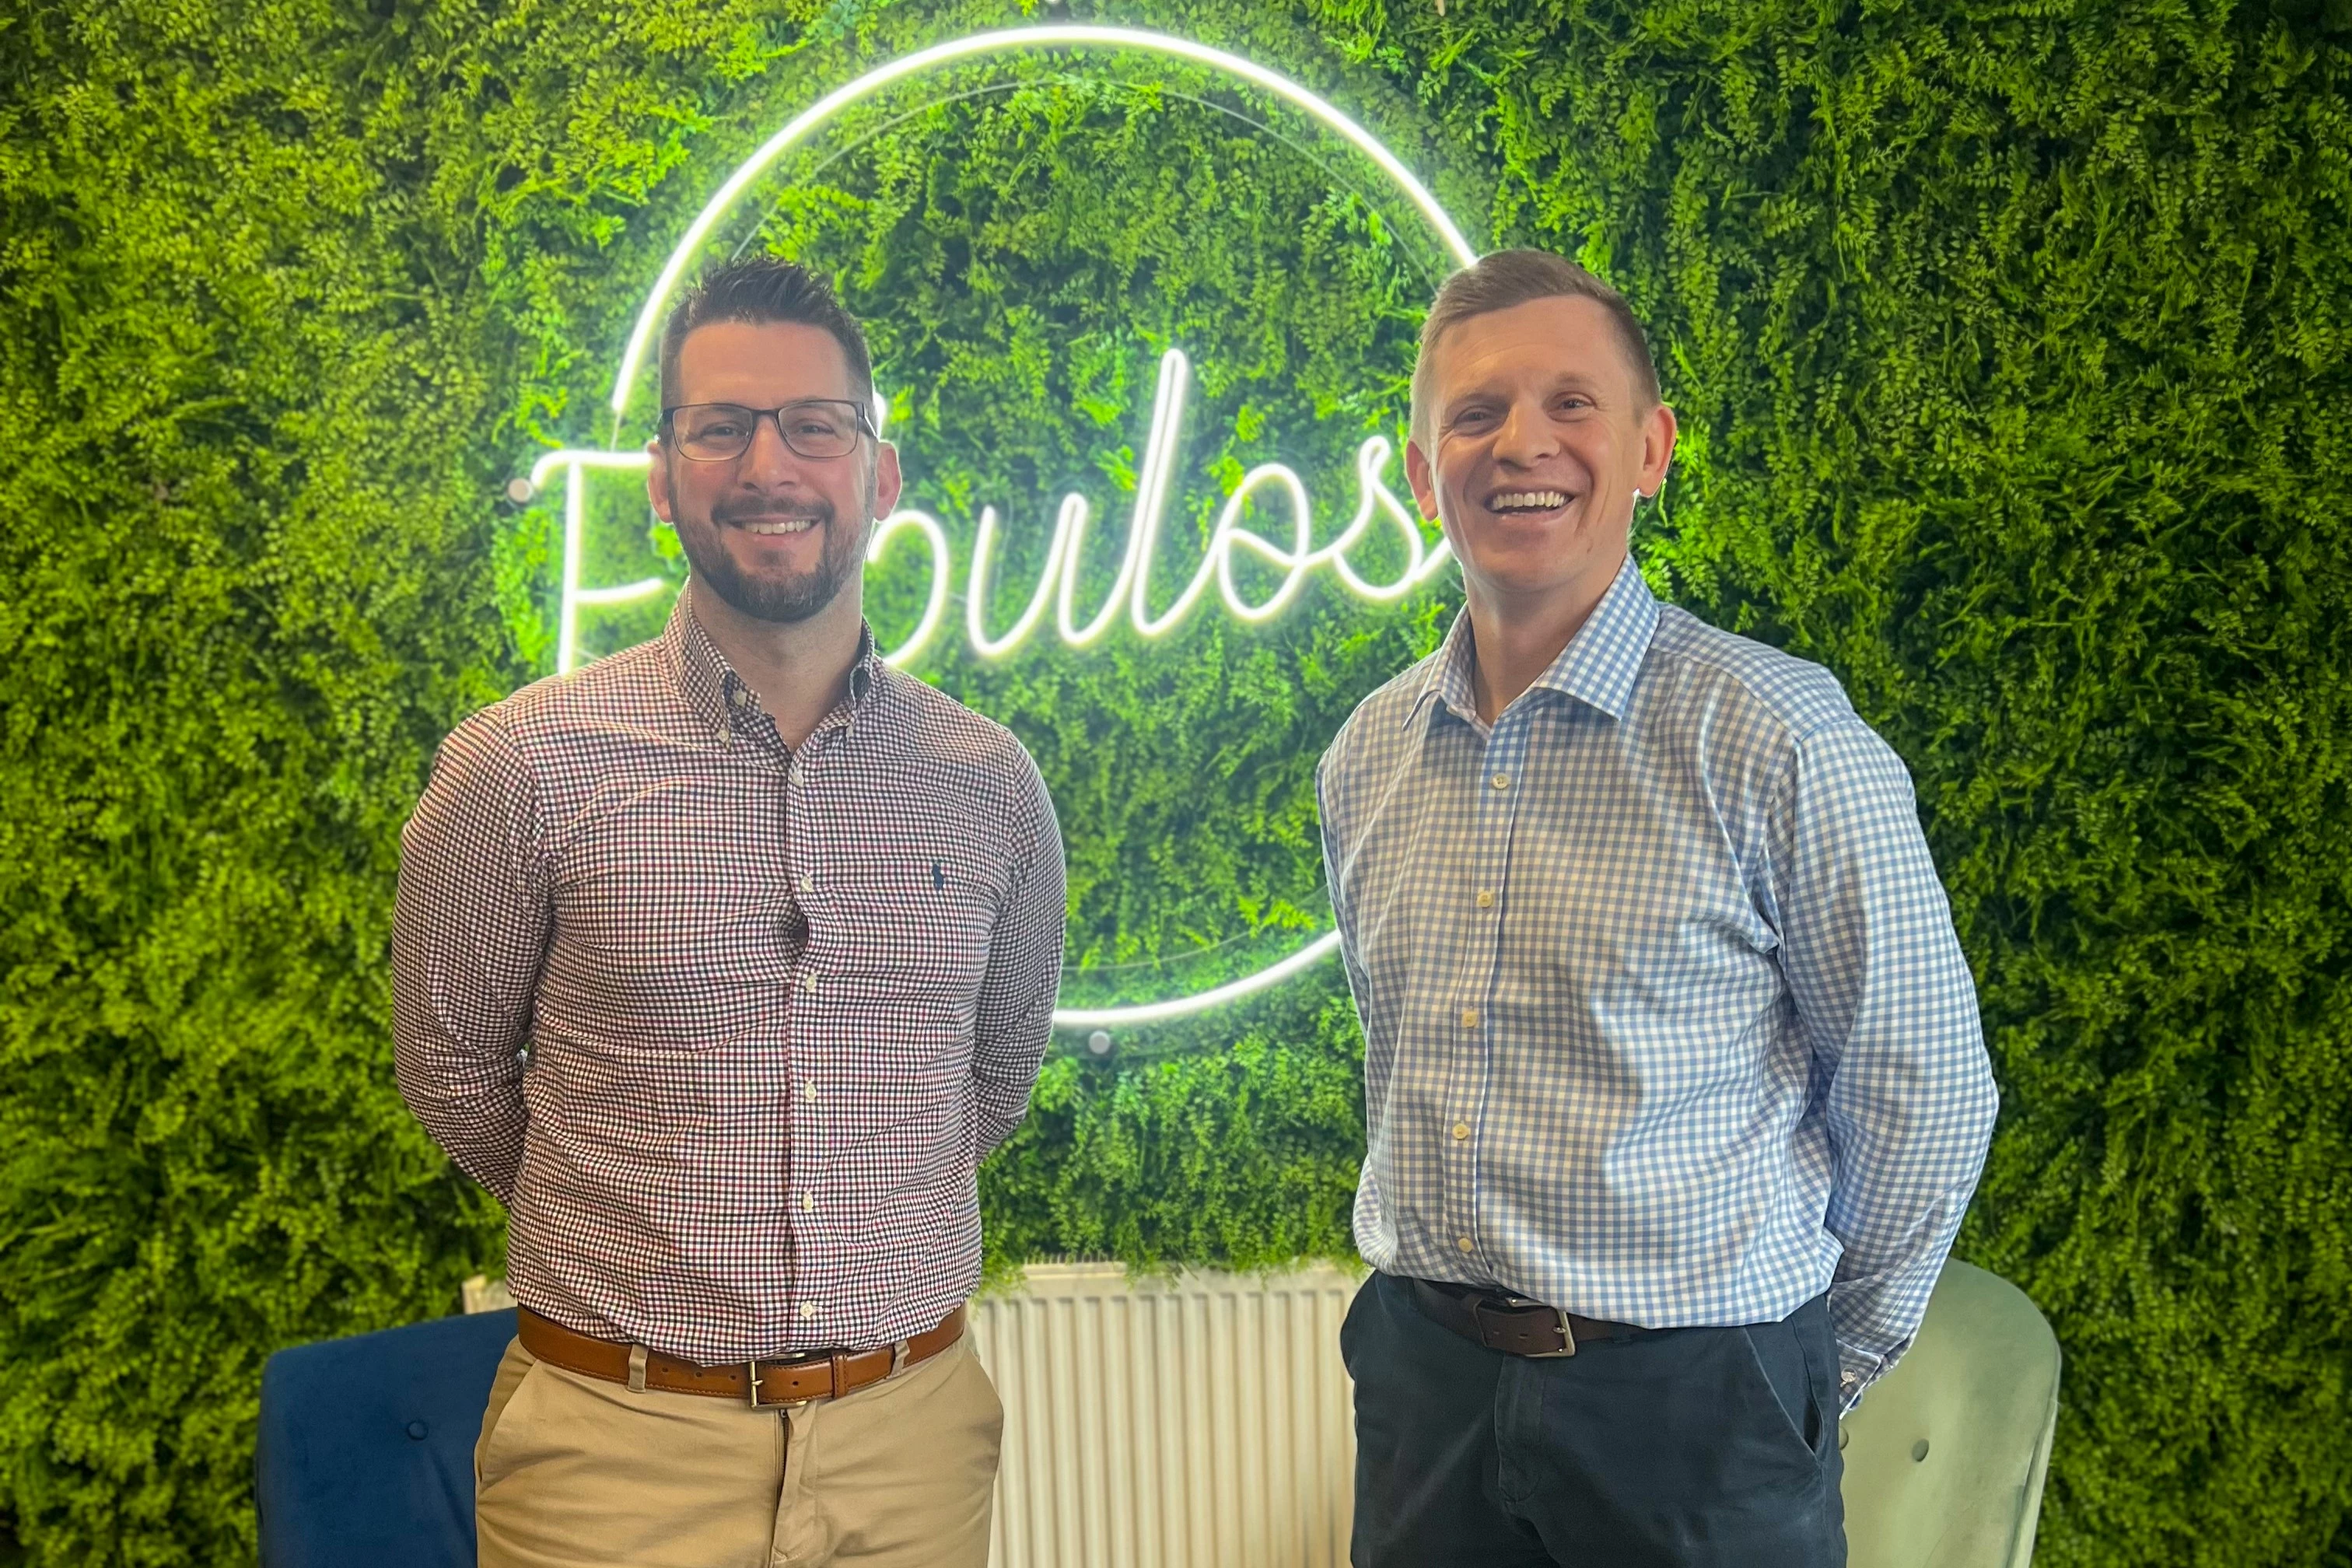 Group Finance Director at Fabulosa, Thomas Mitten (left) and Head of Marketing at Fabulosa, Charles Du Pre (right)